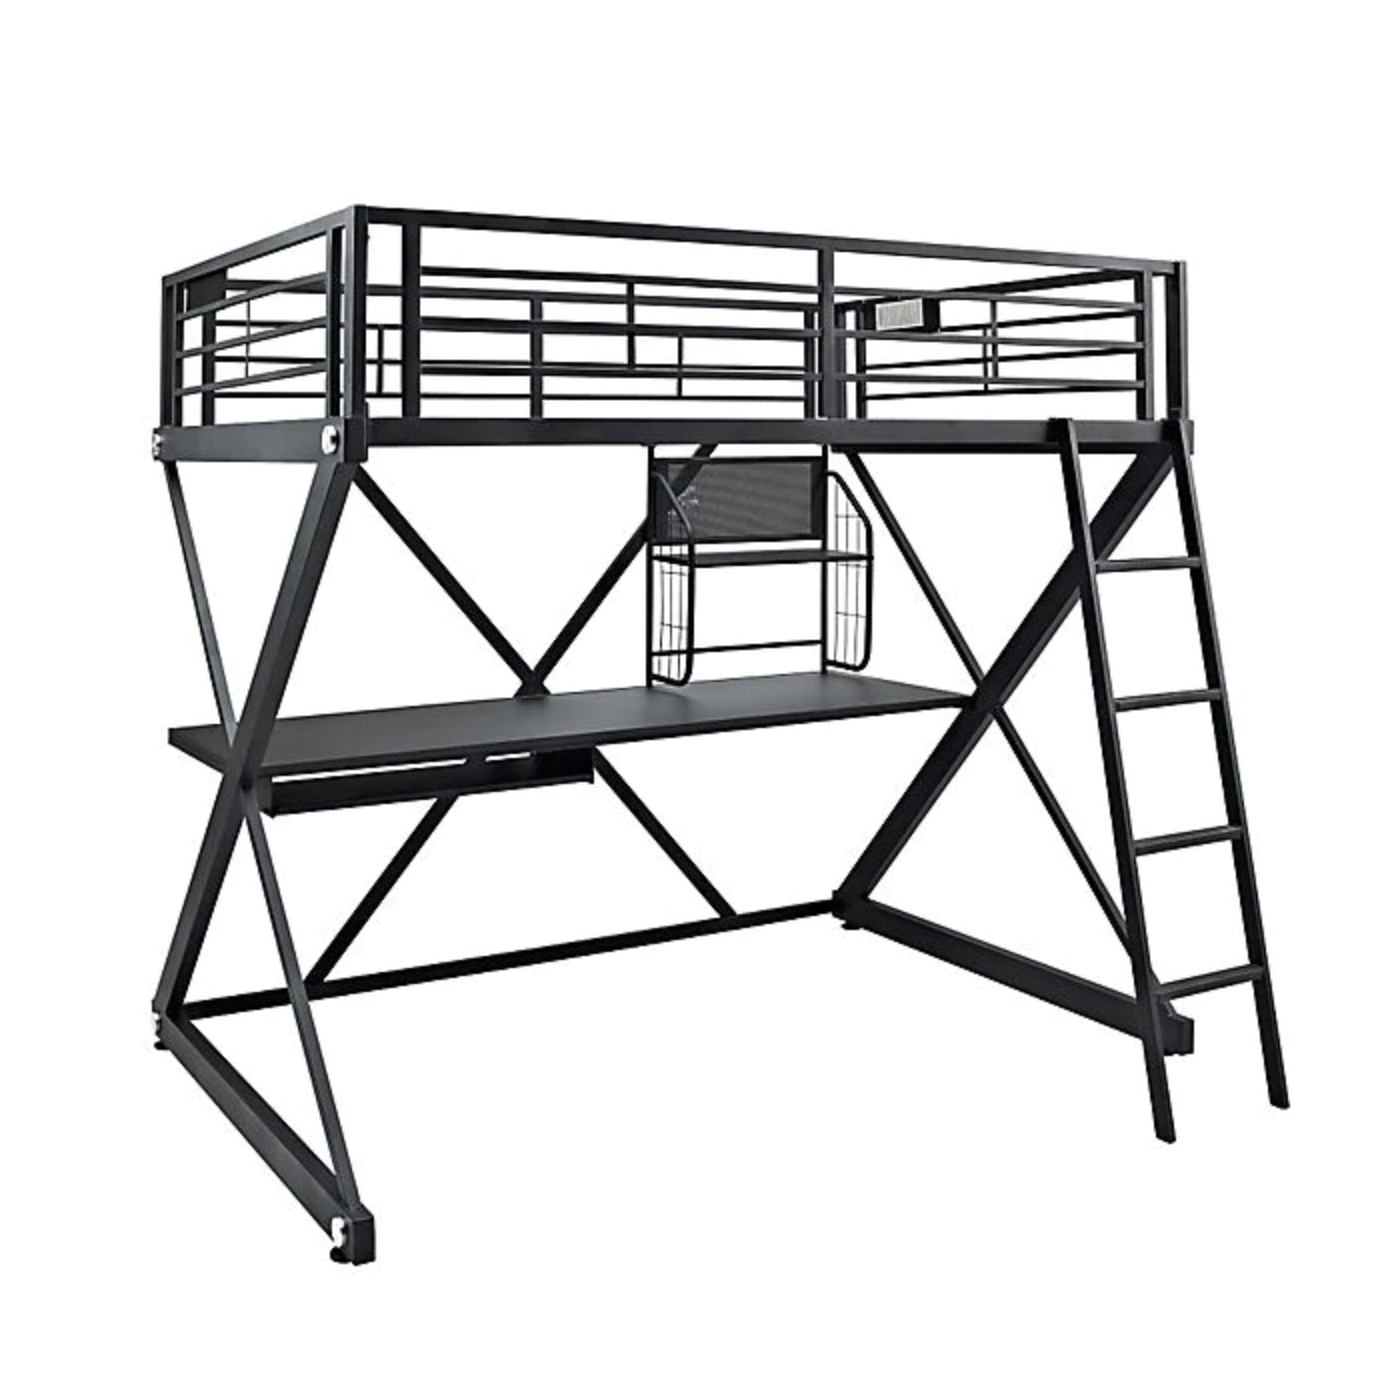 15 Best Loft Beds For S 2022, Metal Full Loft Bed With Desk Underneath